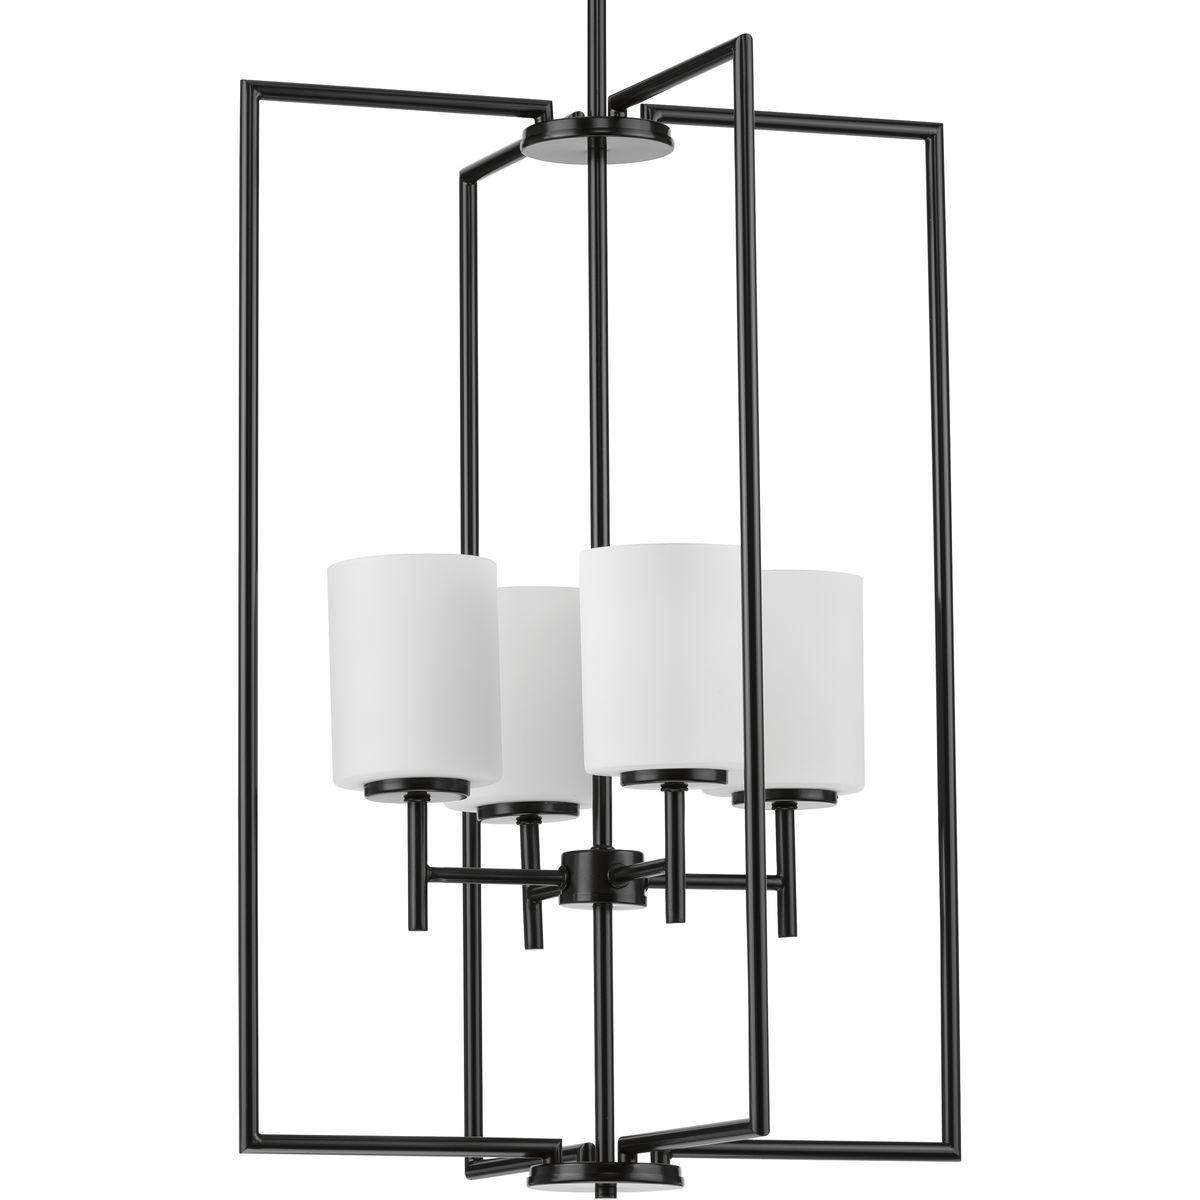 Hubbell P500206-031 Welcome guests with elegance and class as the Reply four-light pendant washes its soft glow over a foyer, dining table, or large kitchen island. The timeless, rectangular silhouette with a statement-making Black finish extends above and below the white, e